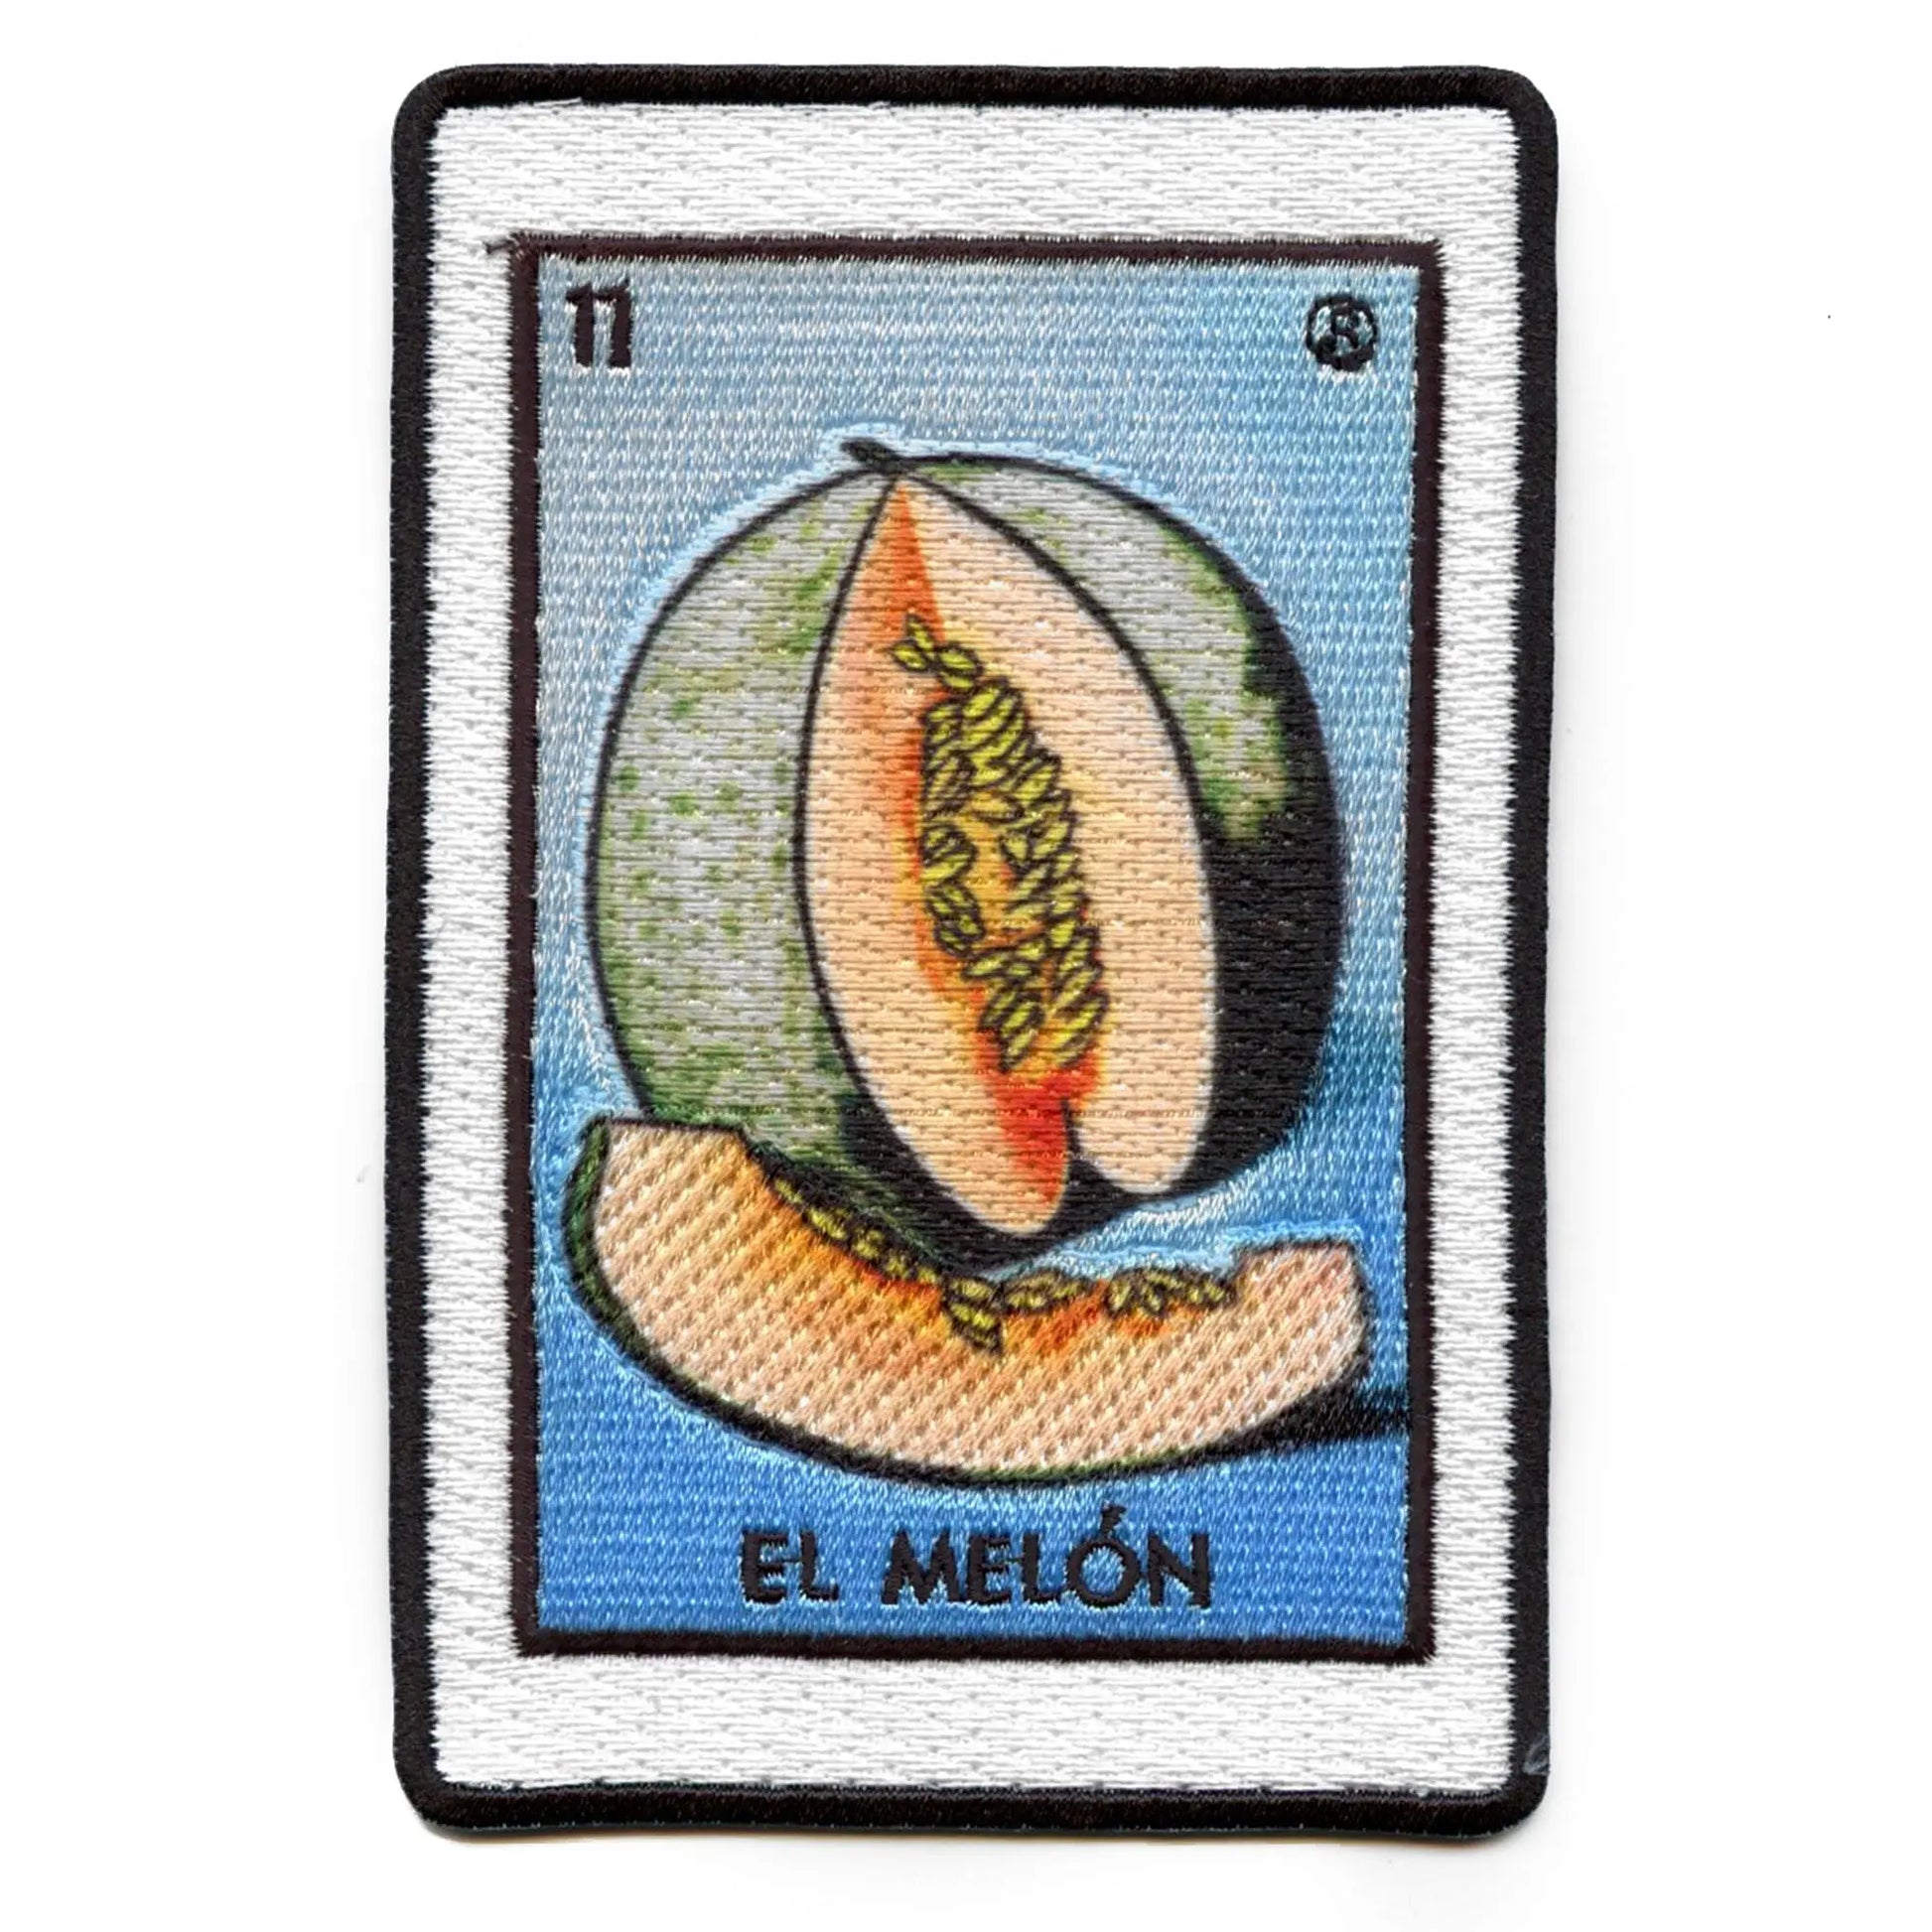 El Melon 11 Patch Mexican Loteria Card Sublimated Embroidery Iron On